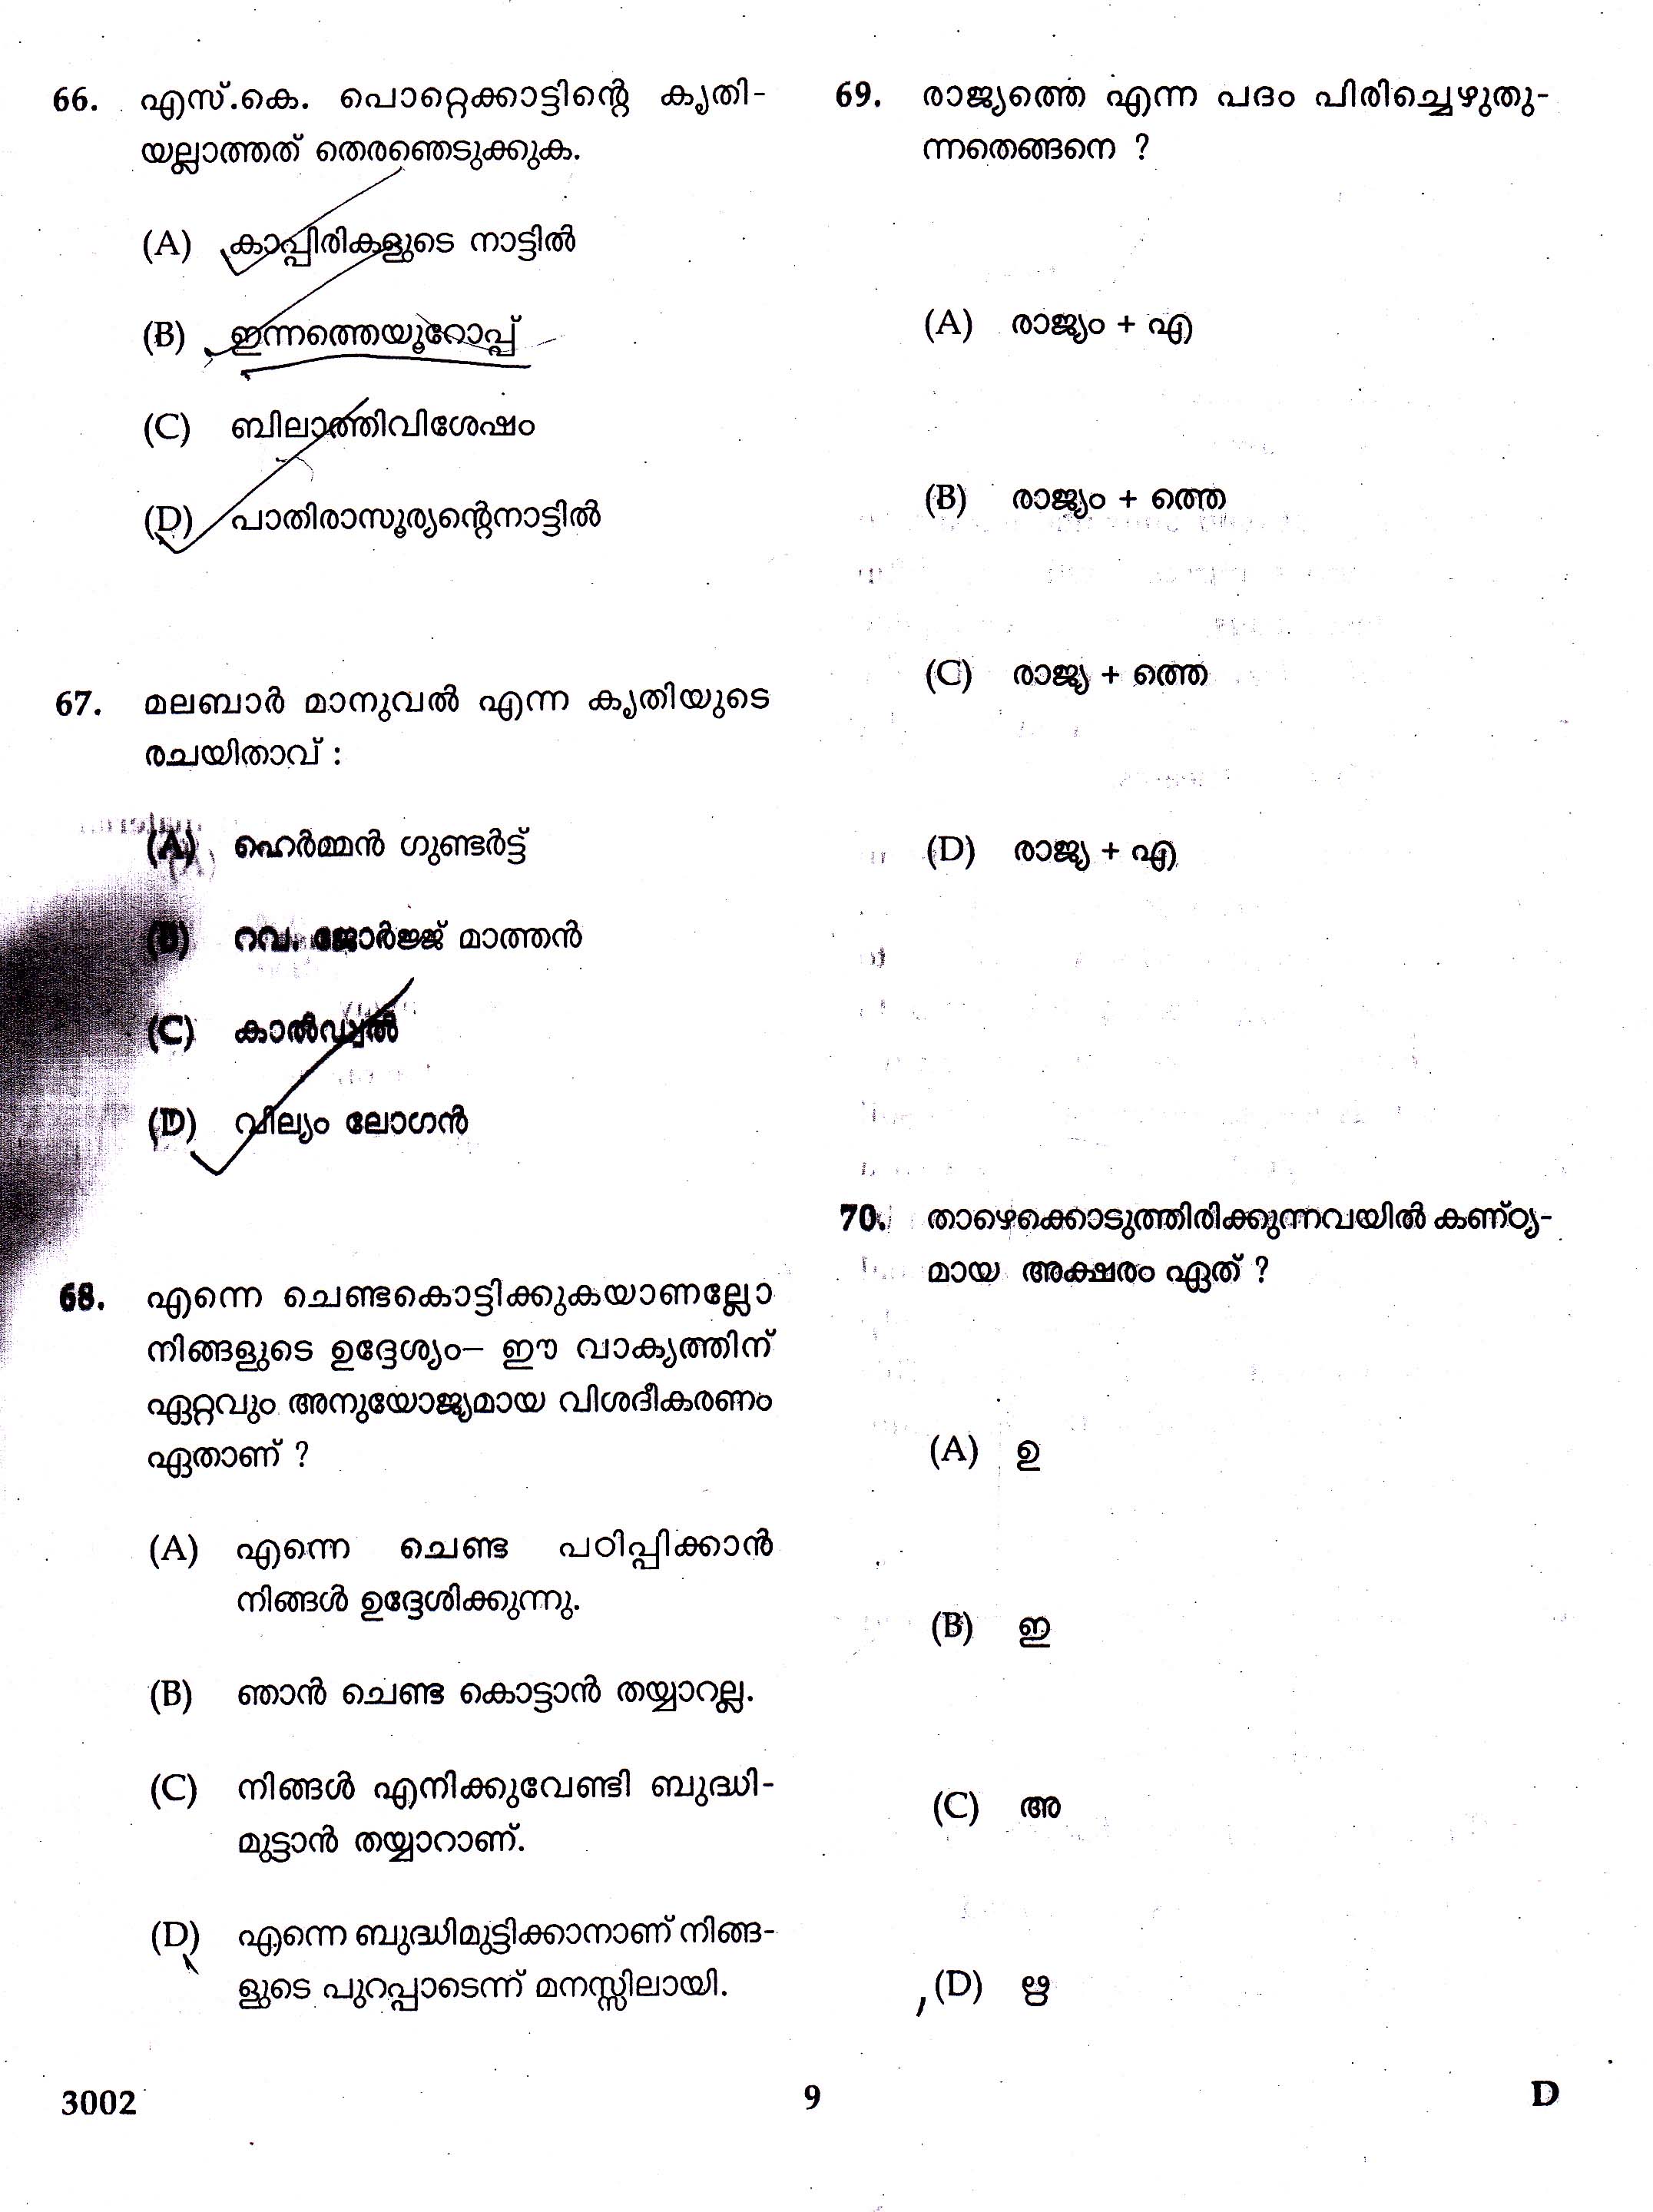 KTET Category III Part 2 Malayalam Question Paper with Answers 2017 7